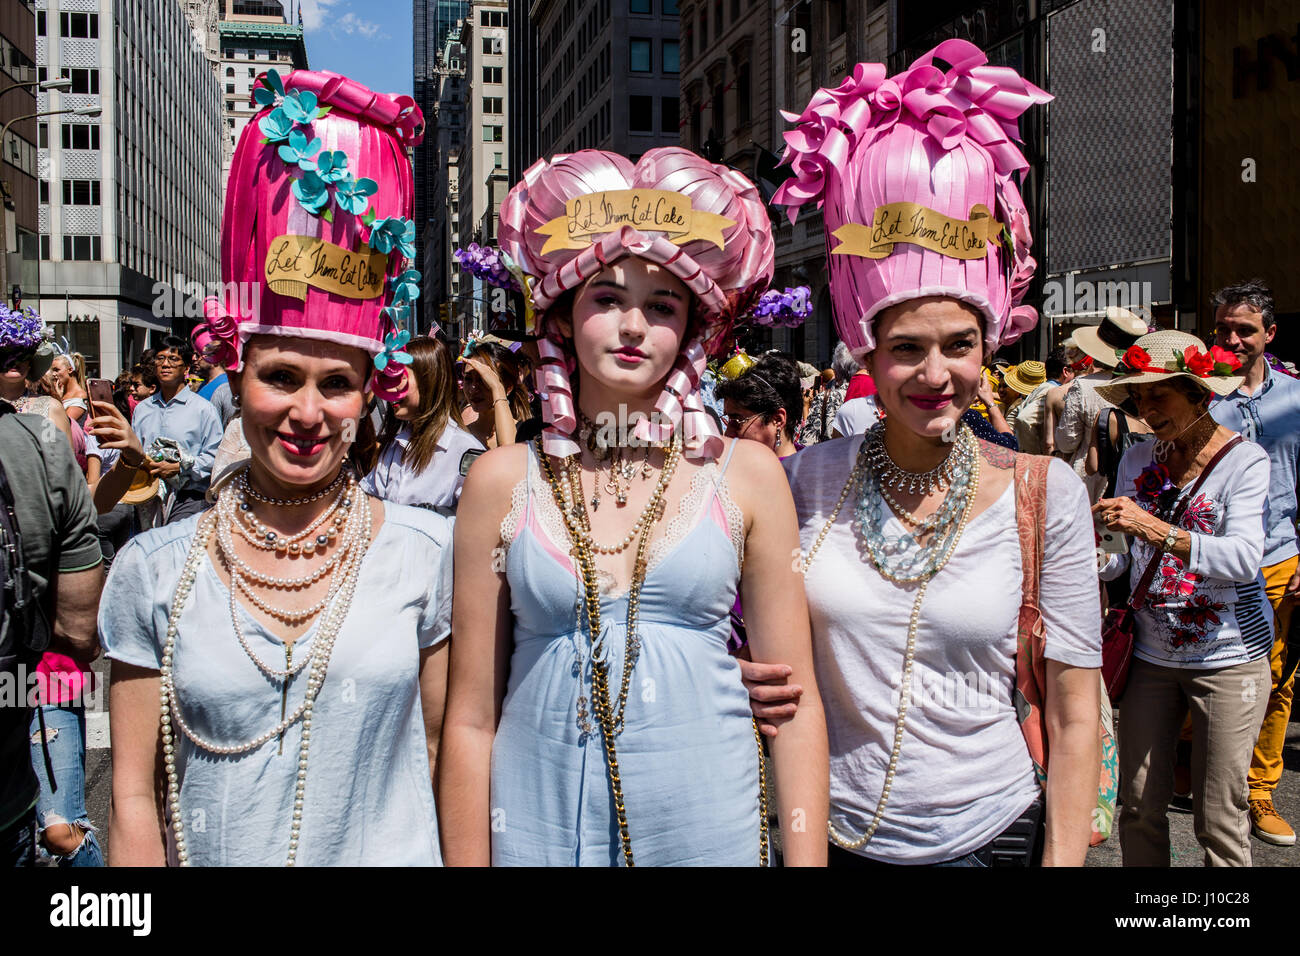 New York, USA. 16th Apr, 2017.  Three women in Marie Antoinette-style headwear, all bearing the label 'Let them eat cake.' at New York's annual Easter Bonnet Parade and Festival on Fifth Avenue. Credit: VWPics/Alamy Live News Stock Photo